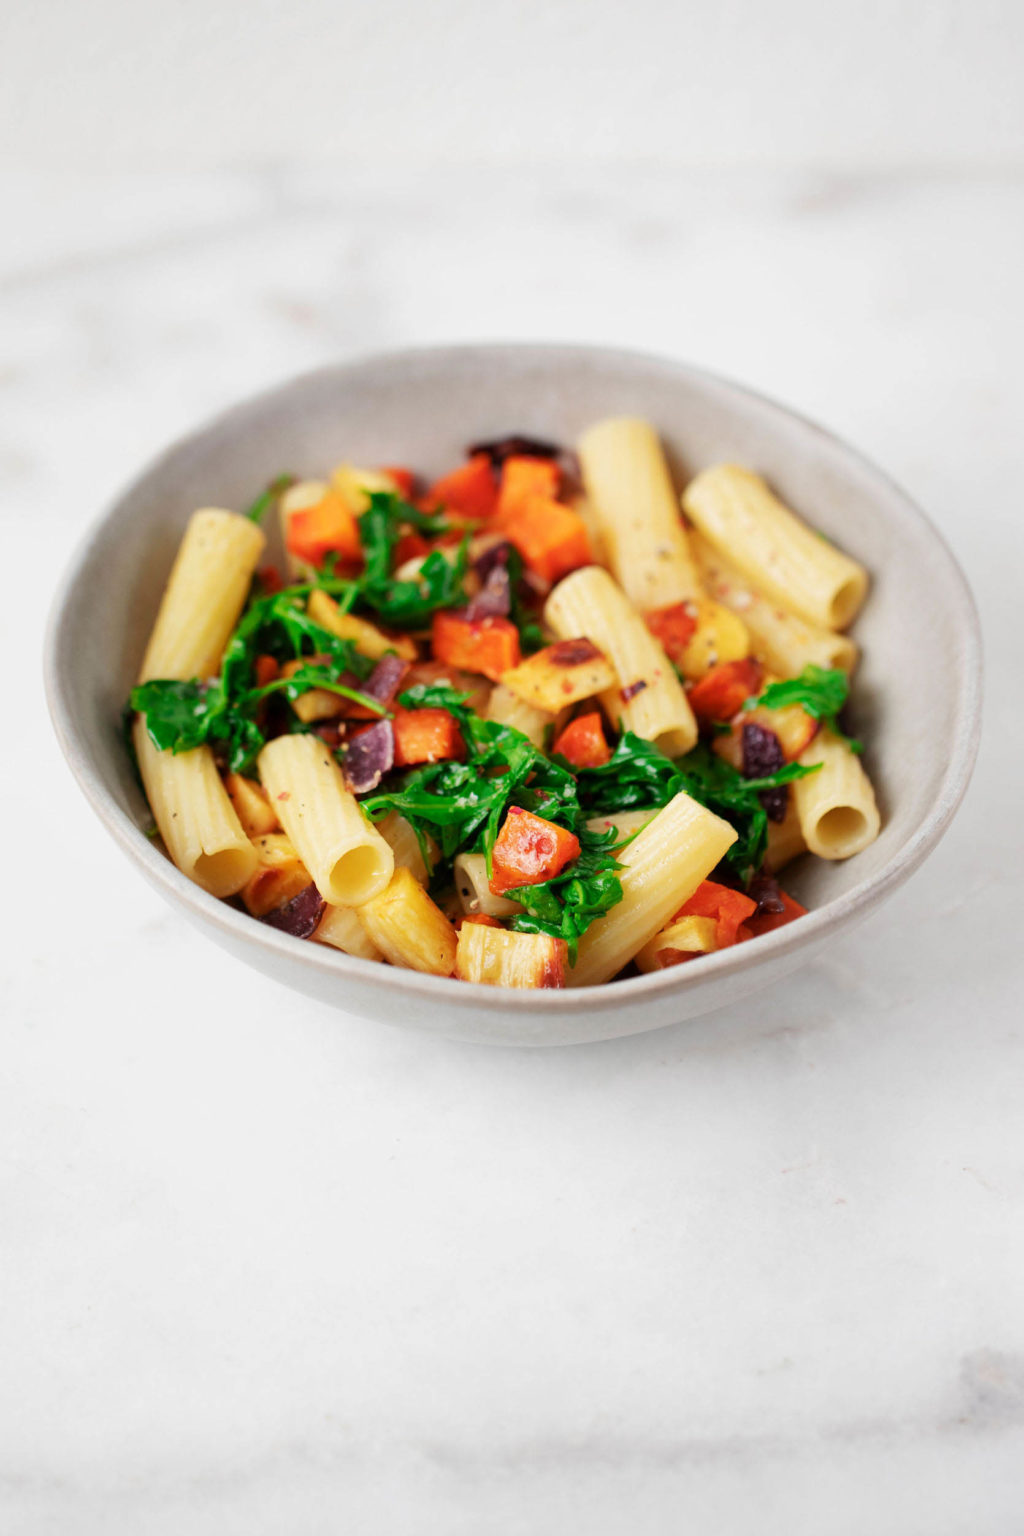 A gray bowl, filled with colorful vegetables and pasta, rests on a white marble surface.